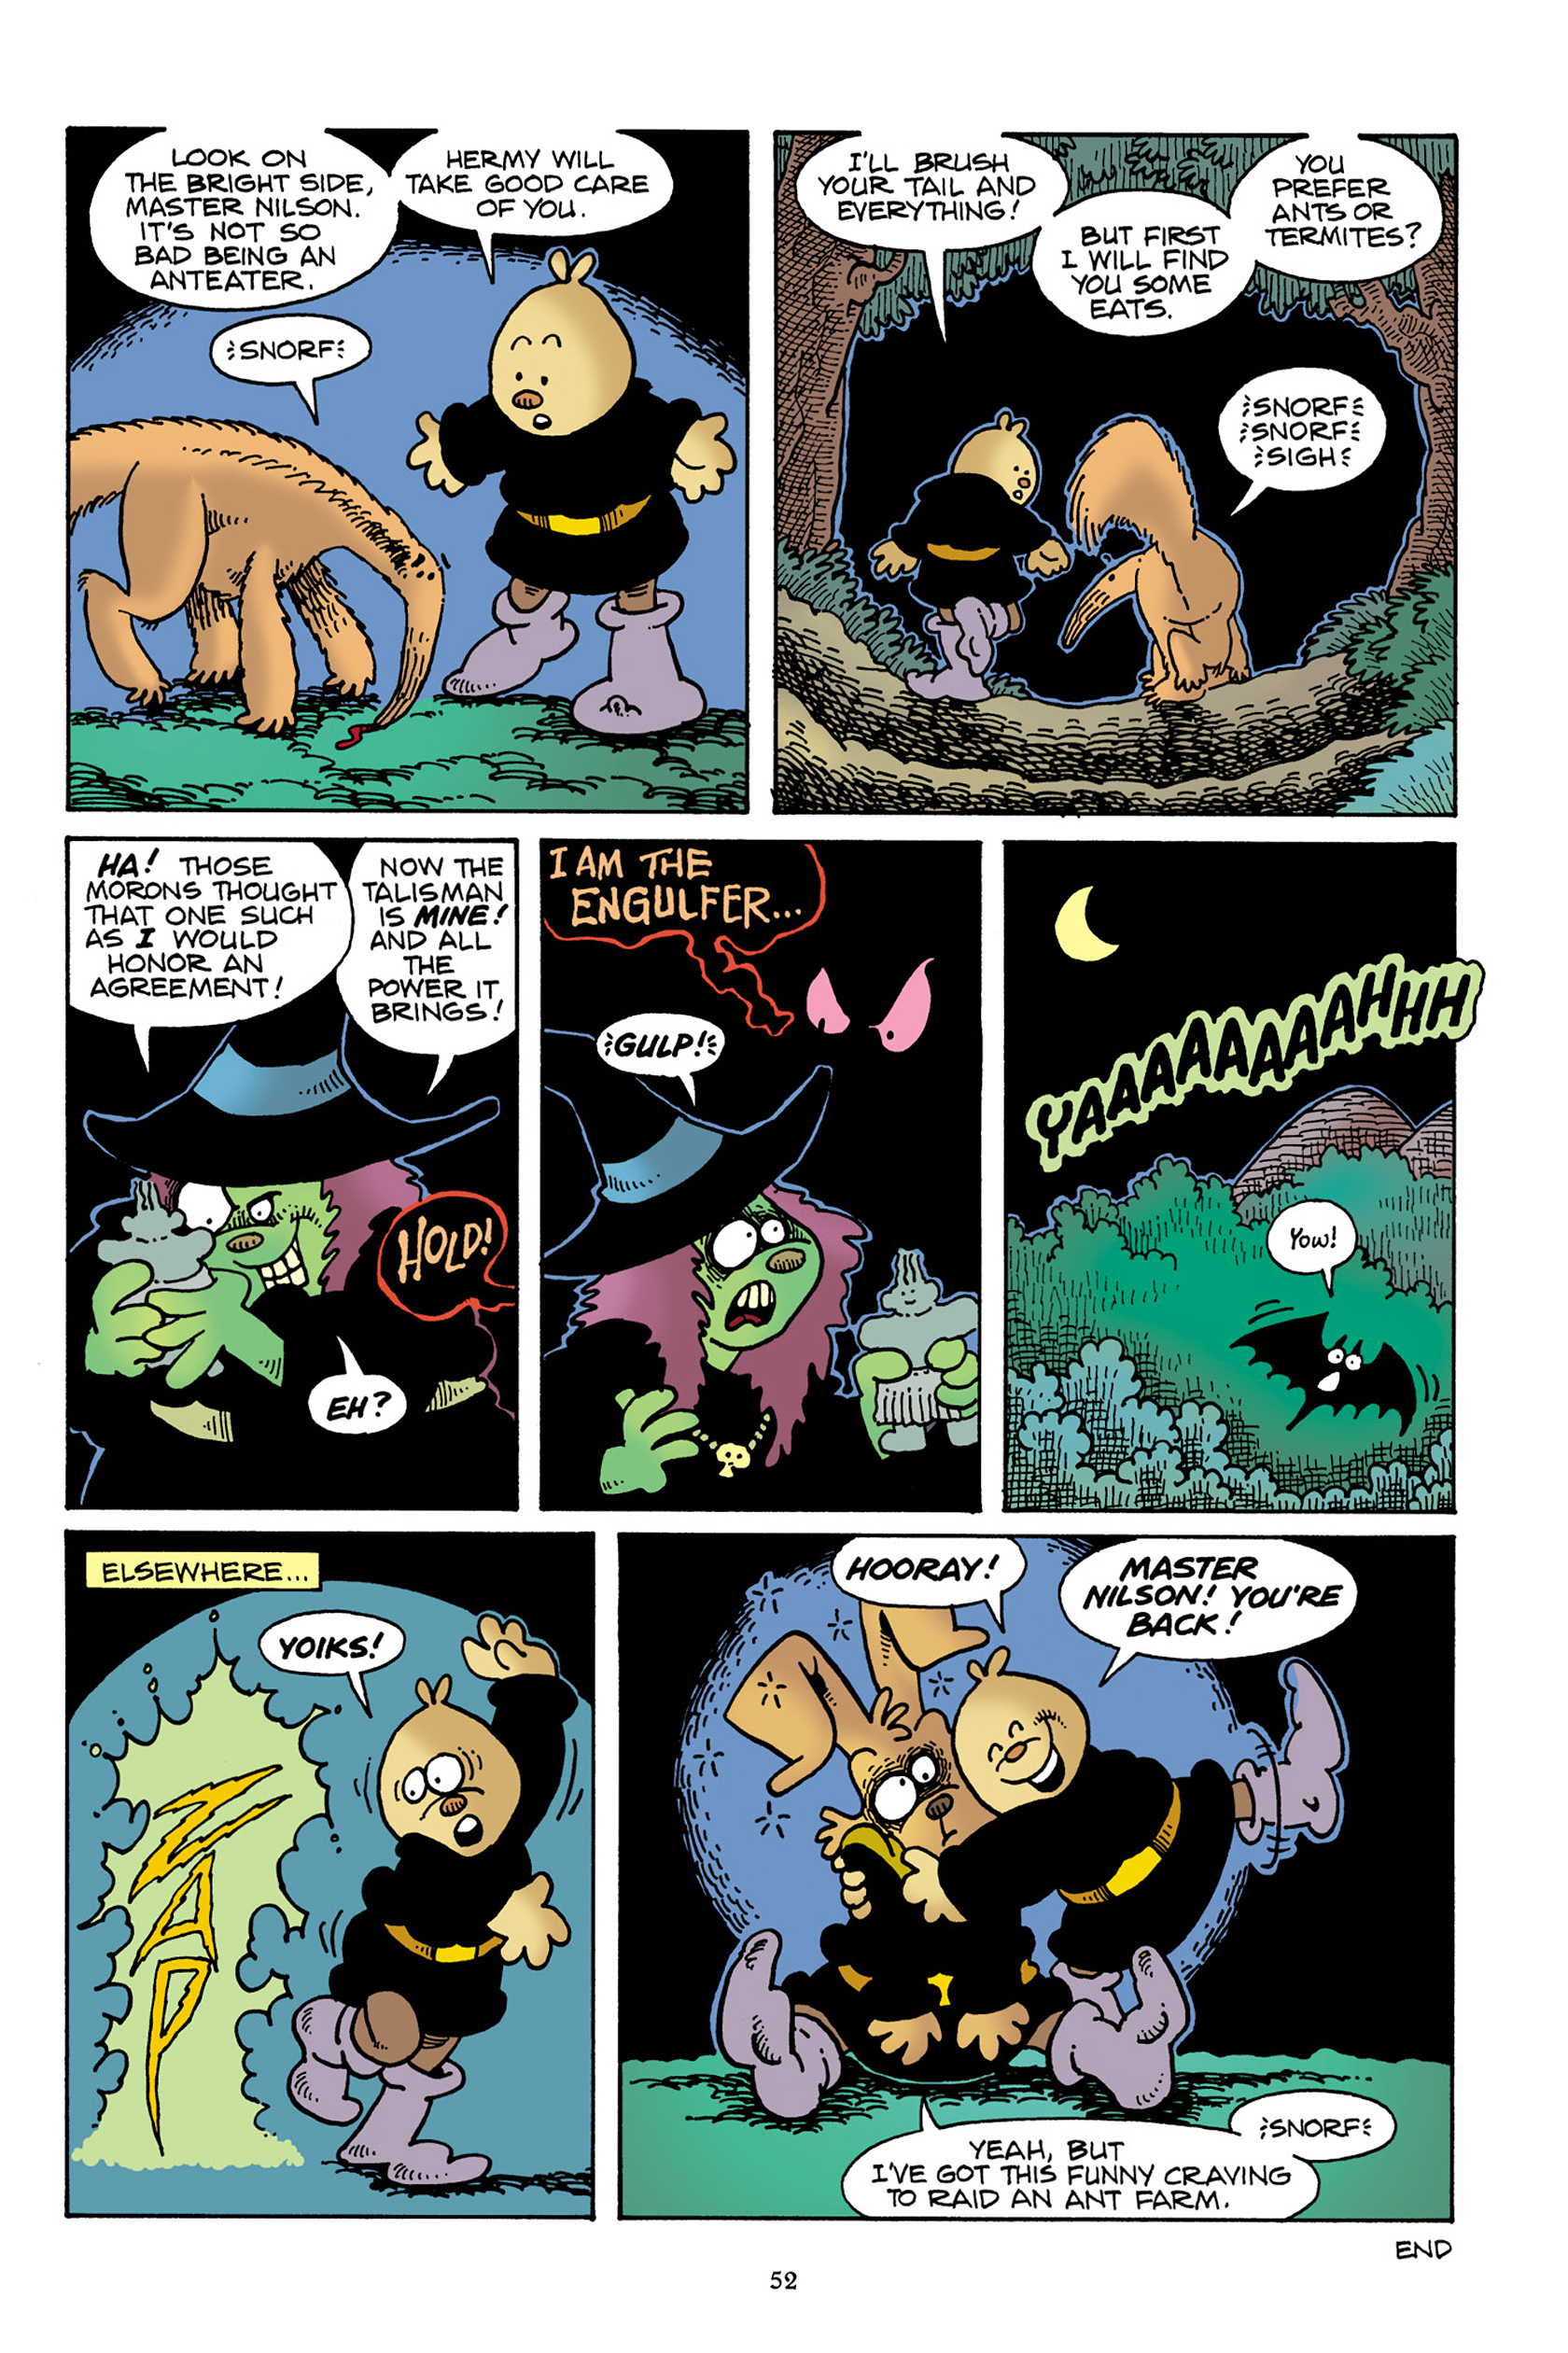 Read online The Adventures of Nilson Groundthumper and Hermy comic -  Issue # TPB - 52